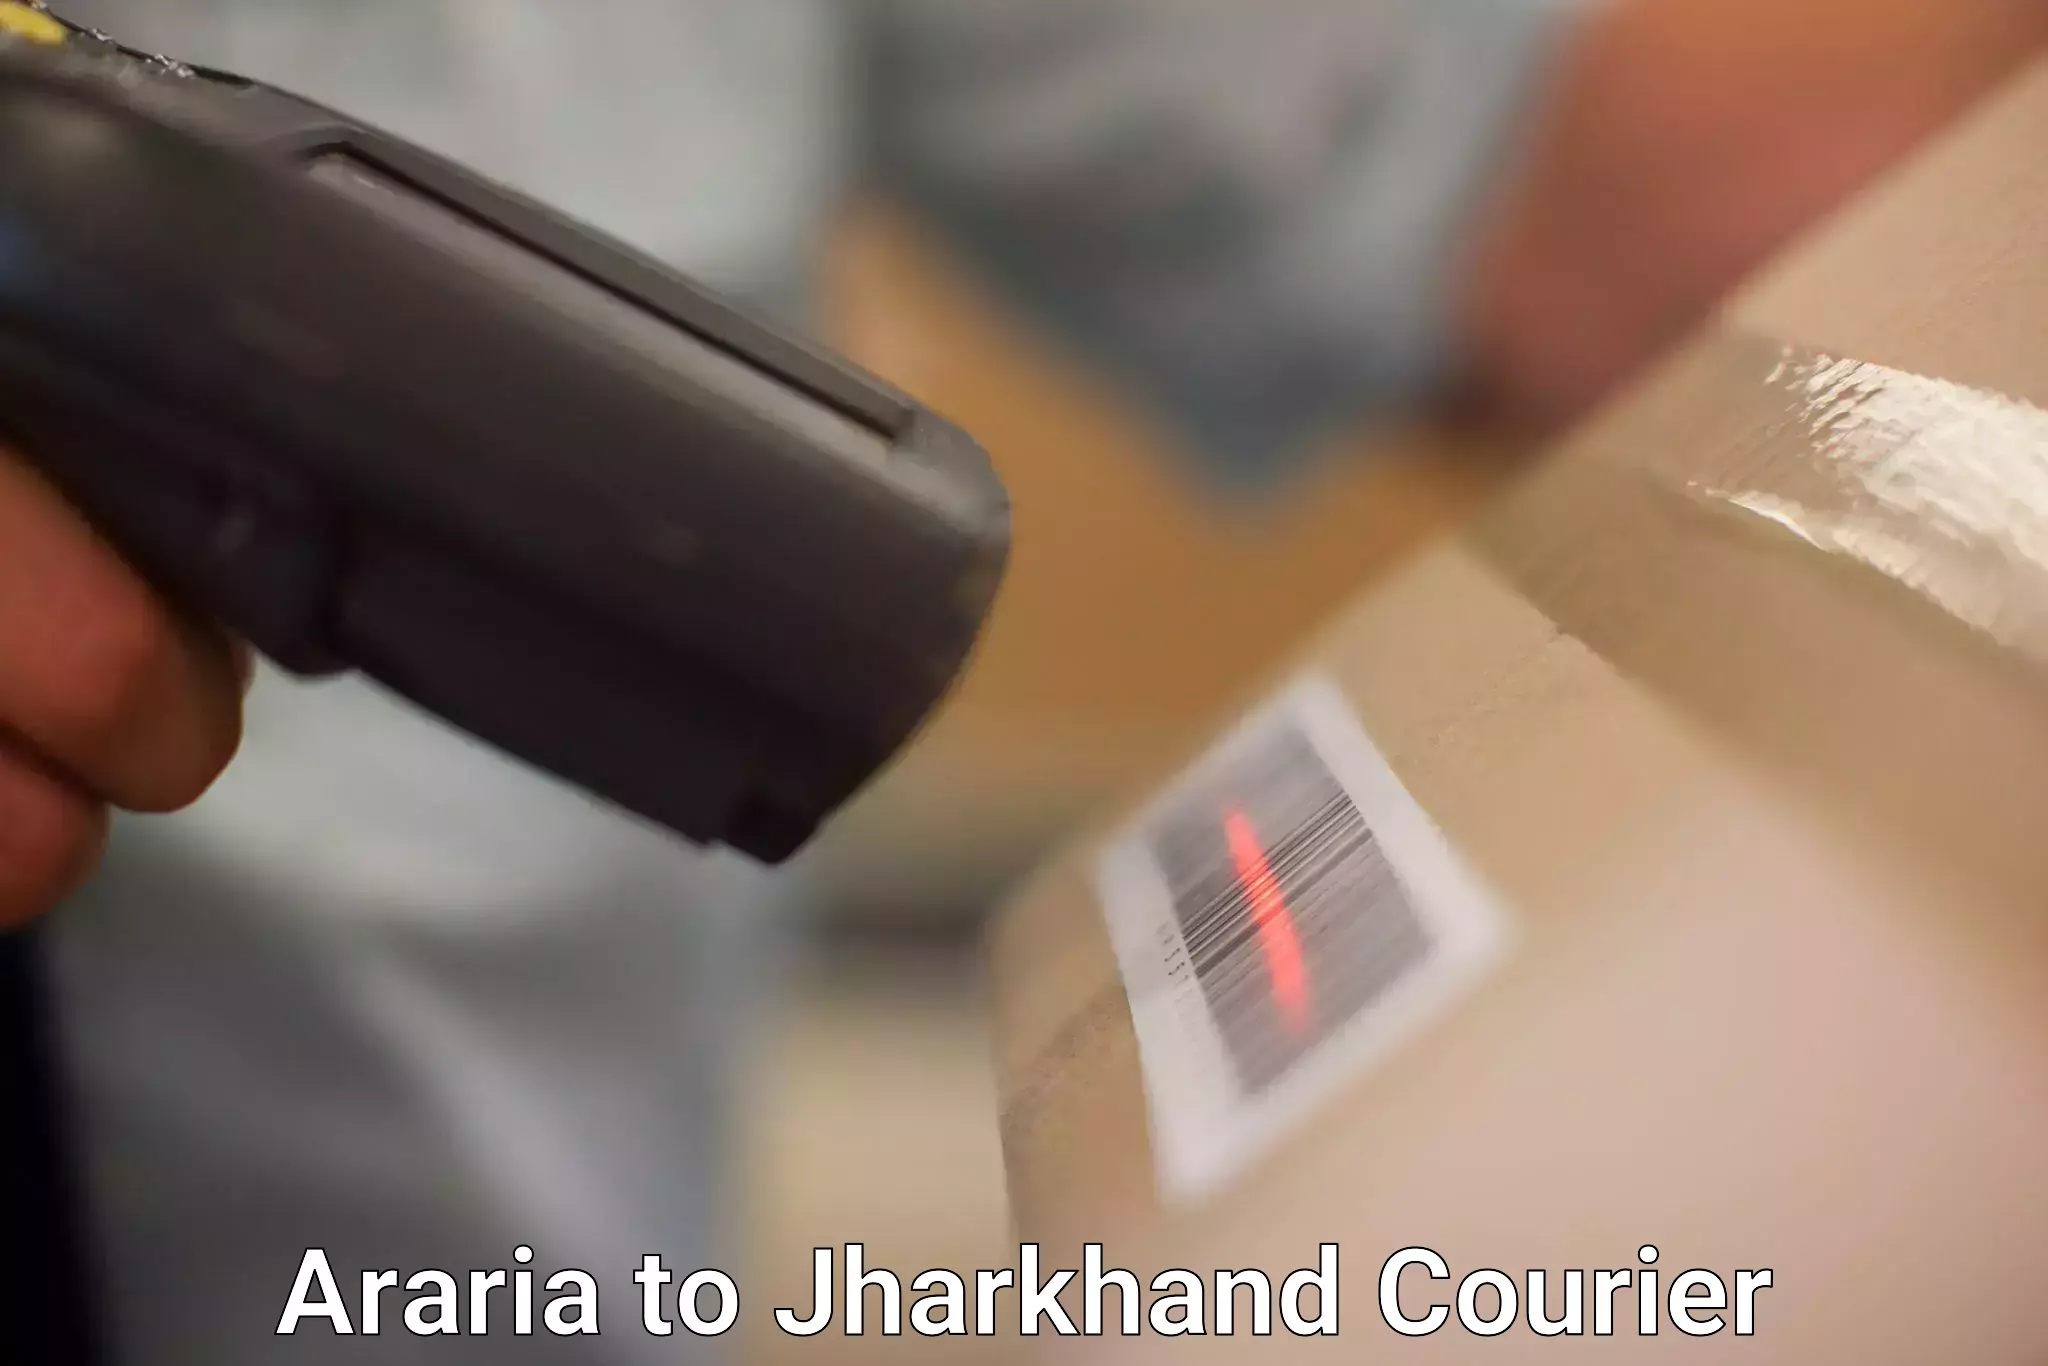 Personal parcel delivery Araria to Dhanbad